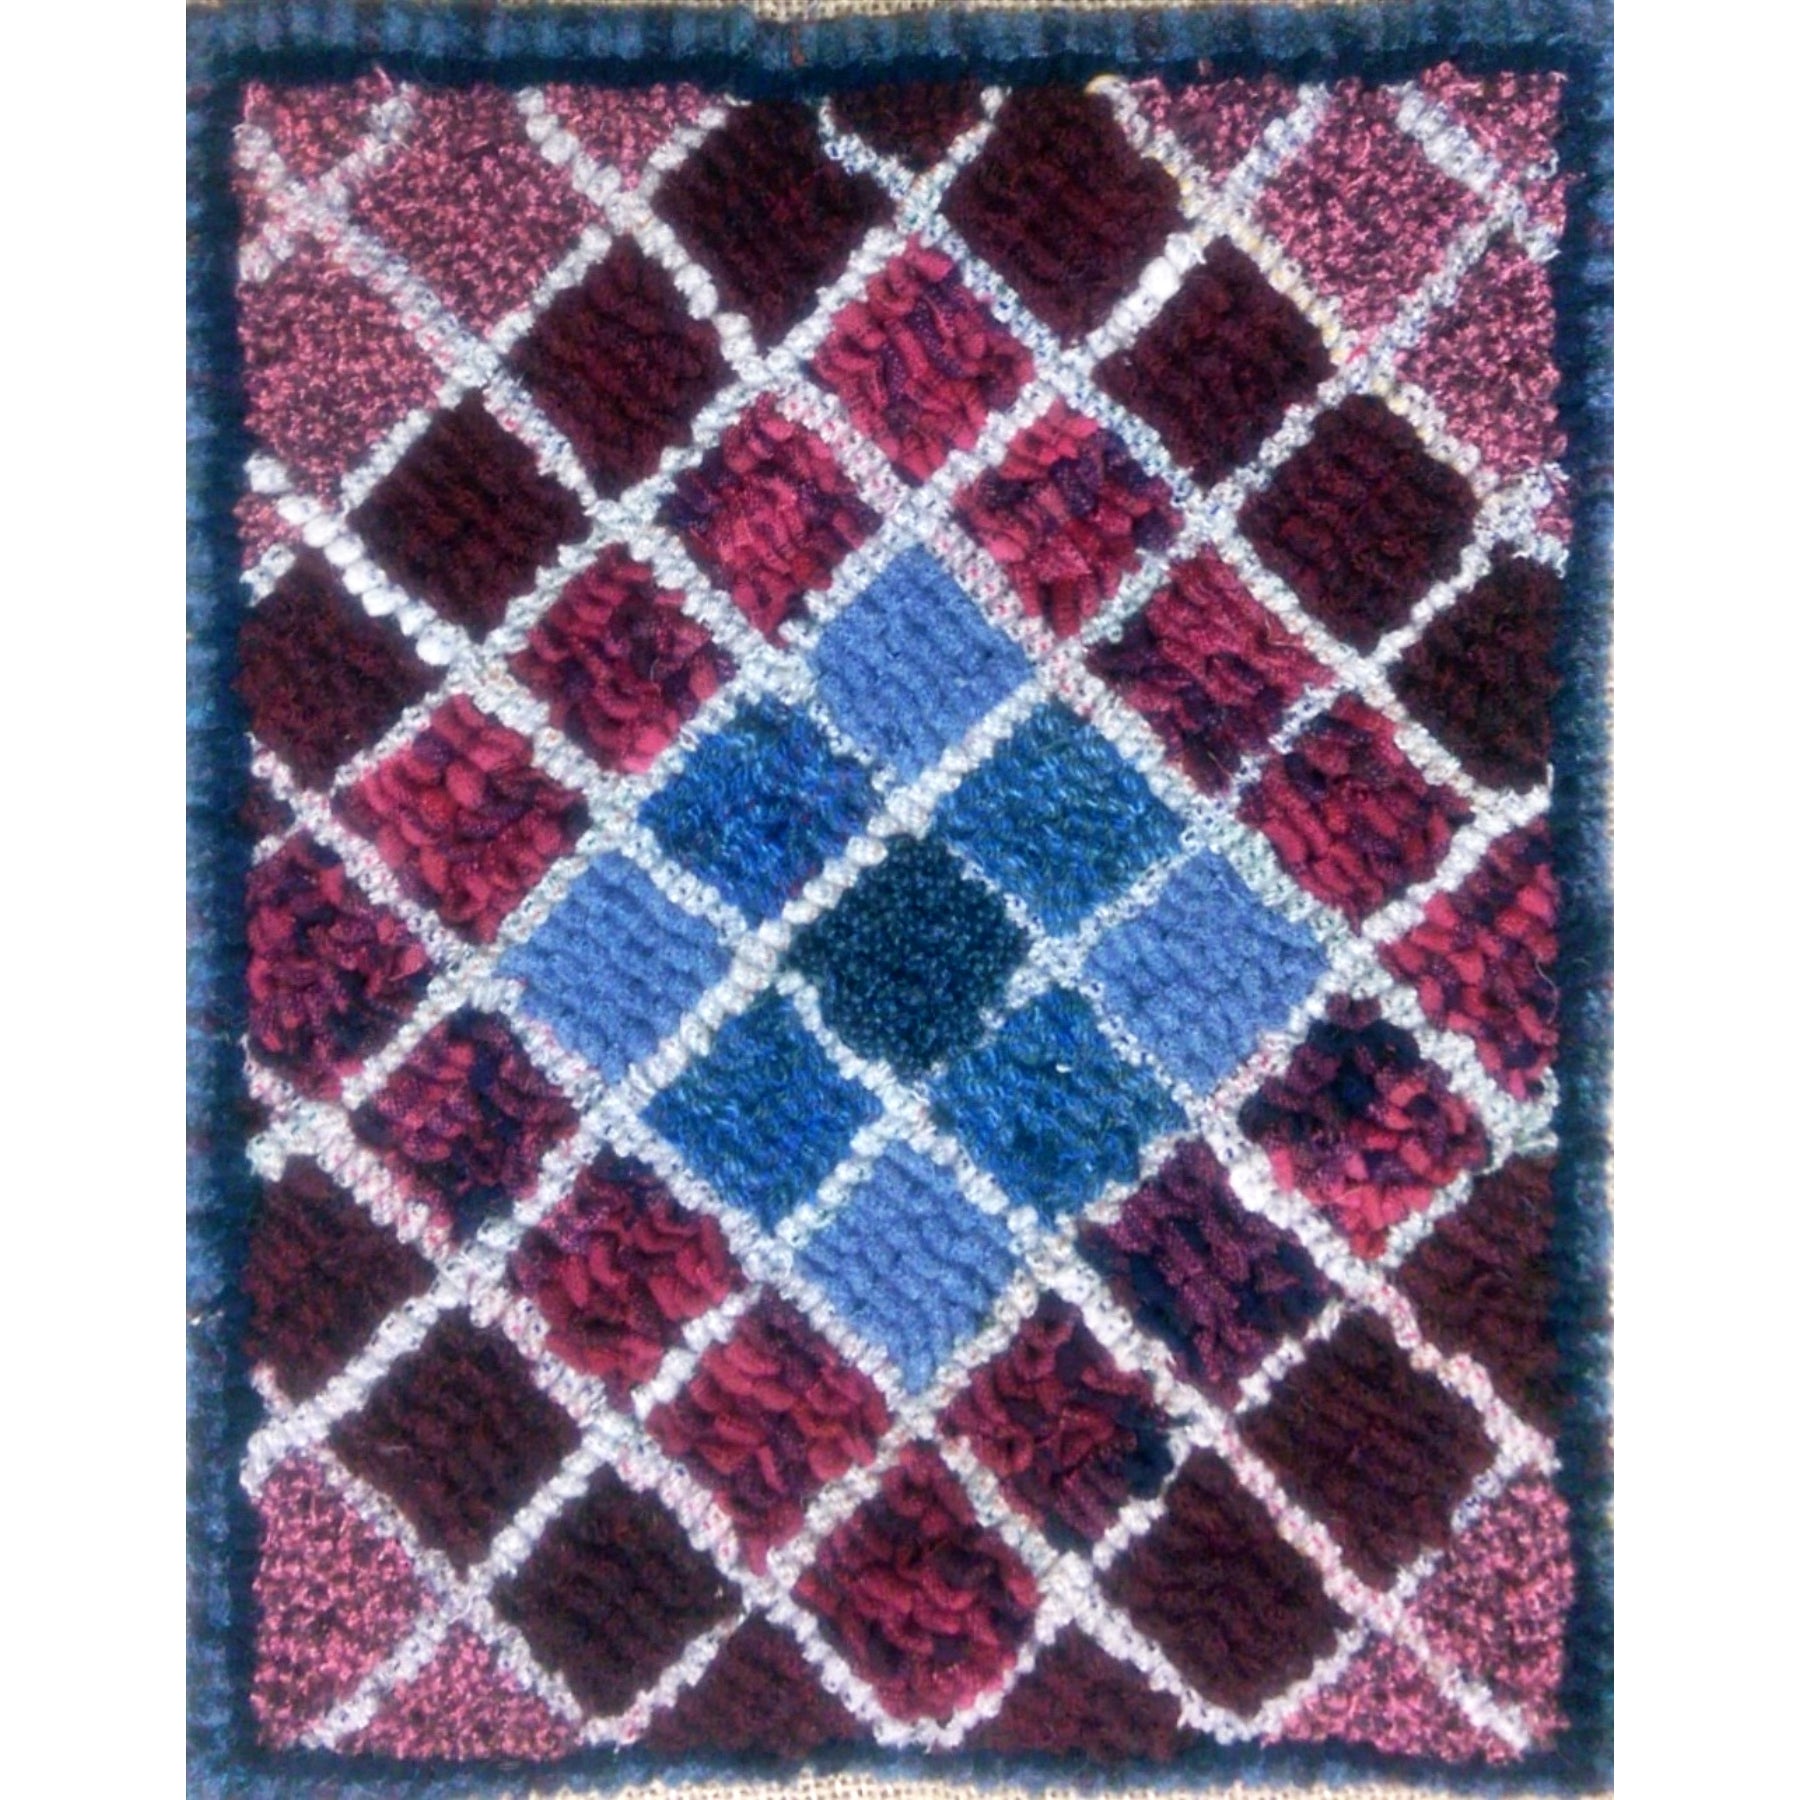 Diamond Quilt Square, rug hooked by Connie Bradley